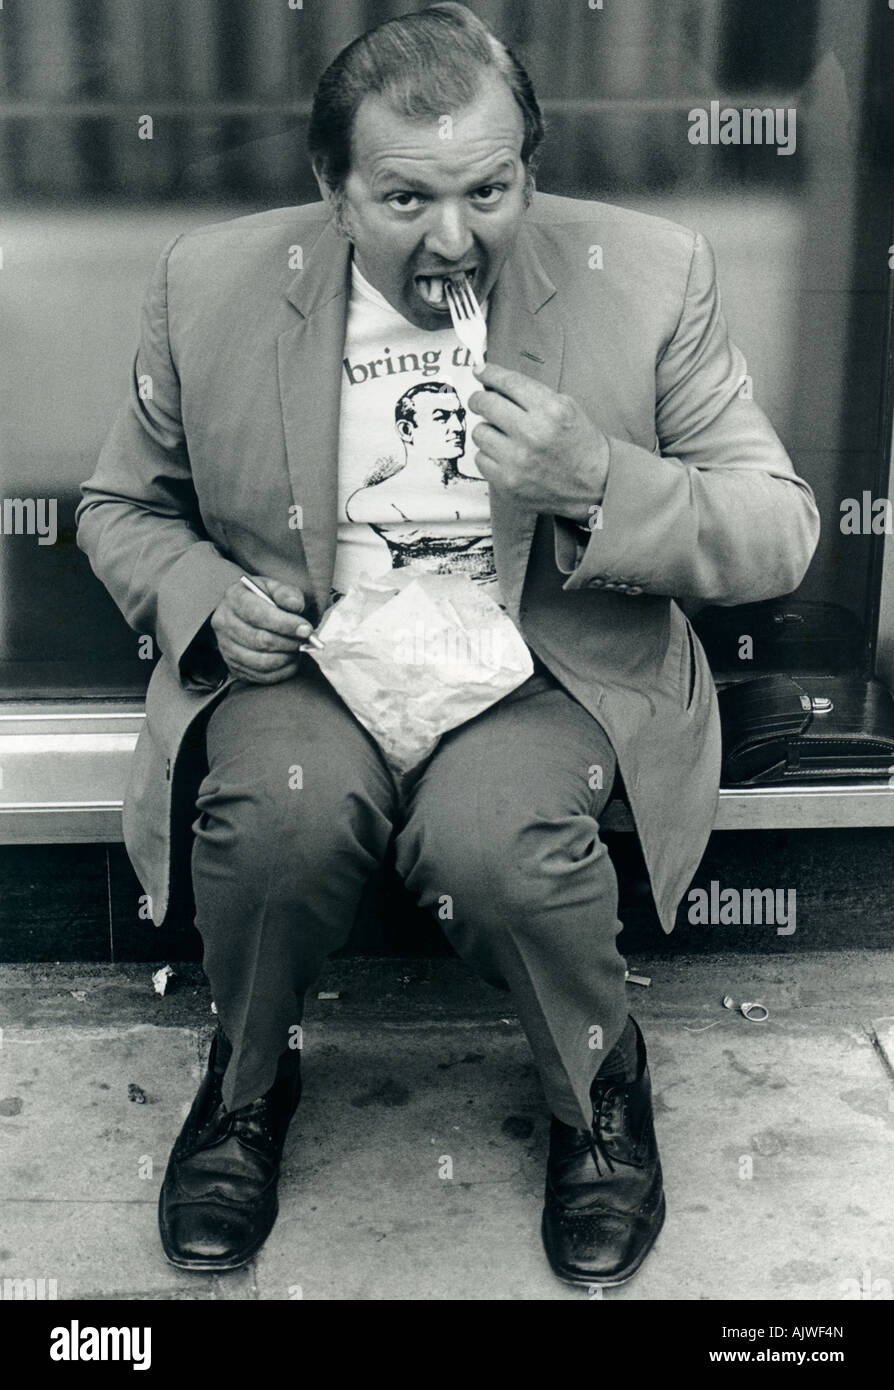 1970s black and white candid of man (50s) eating chips, London. Stock Photo